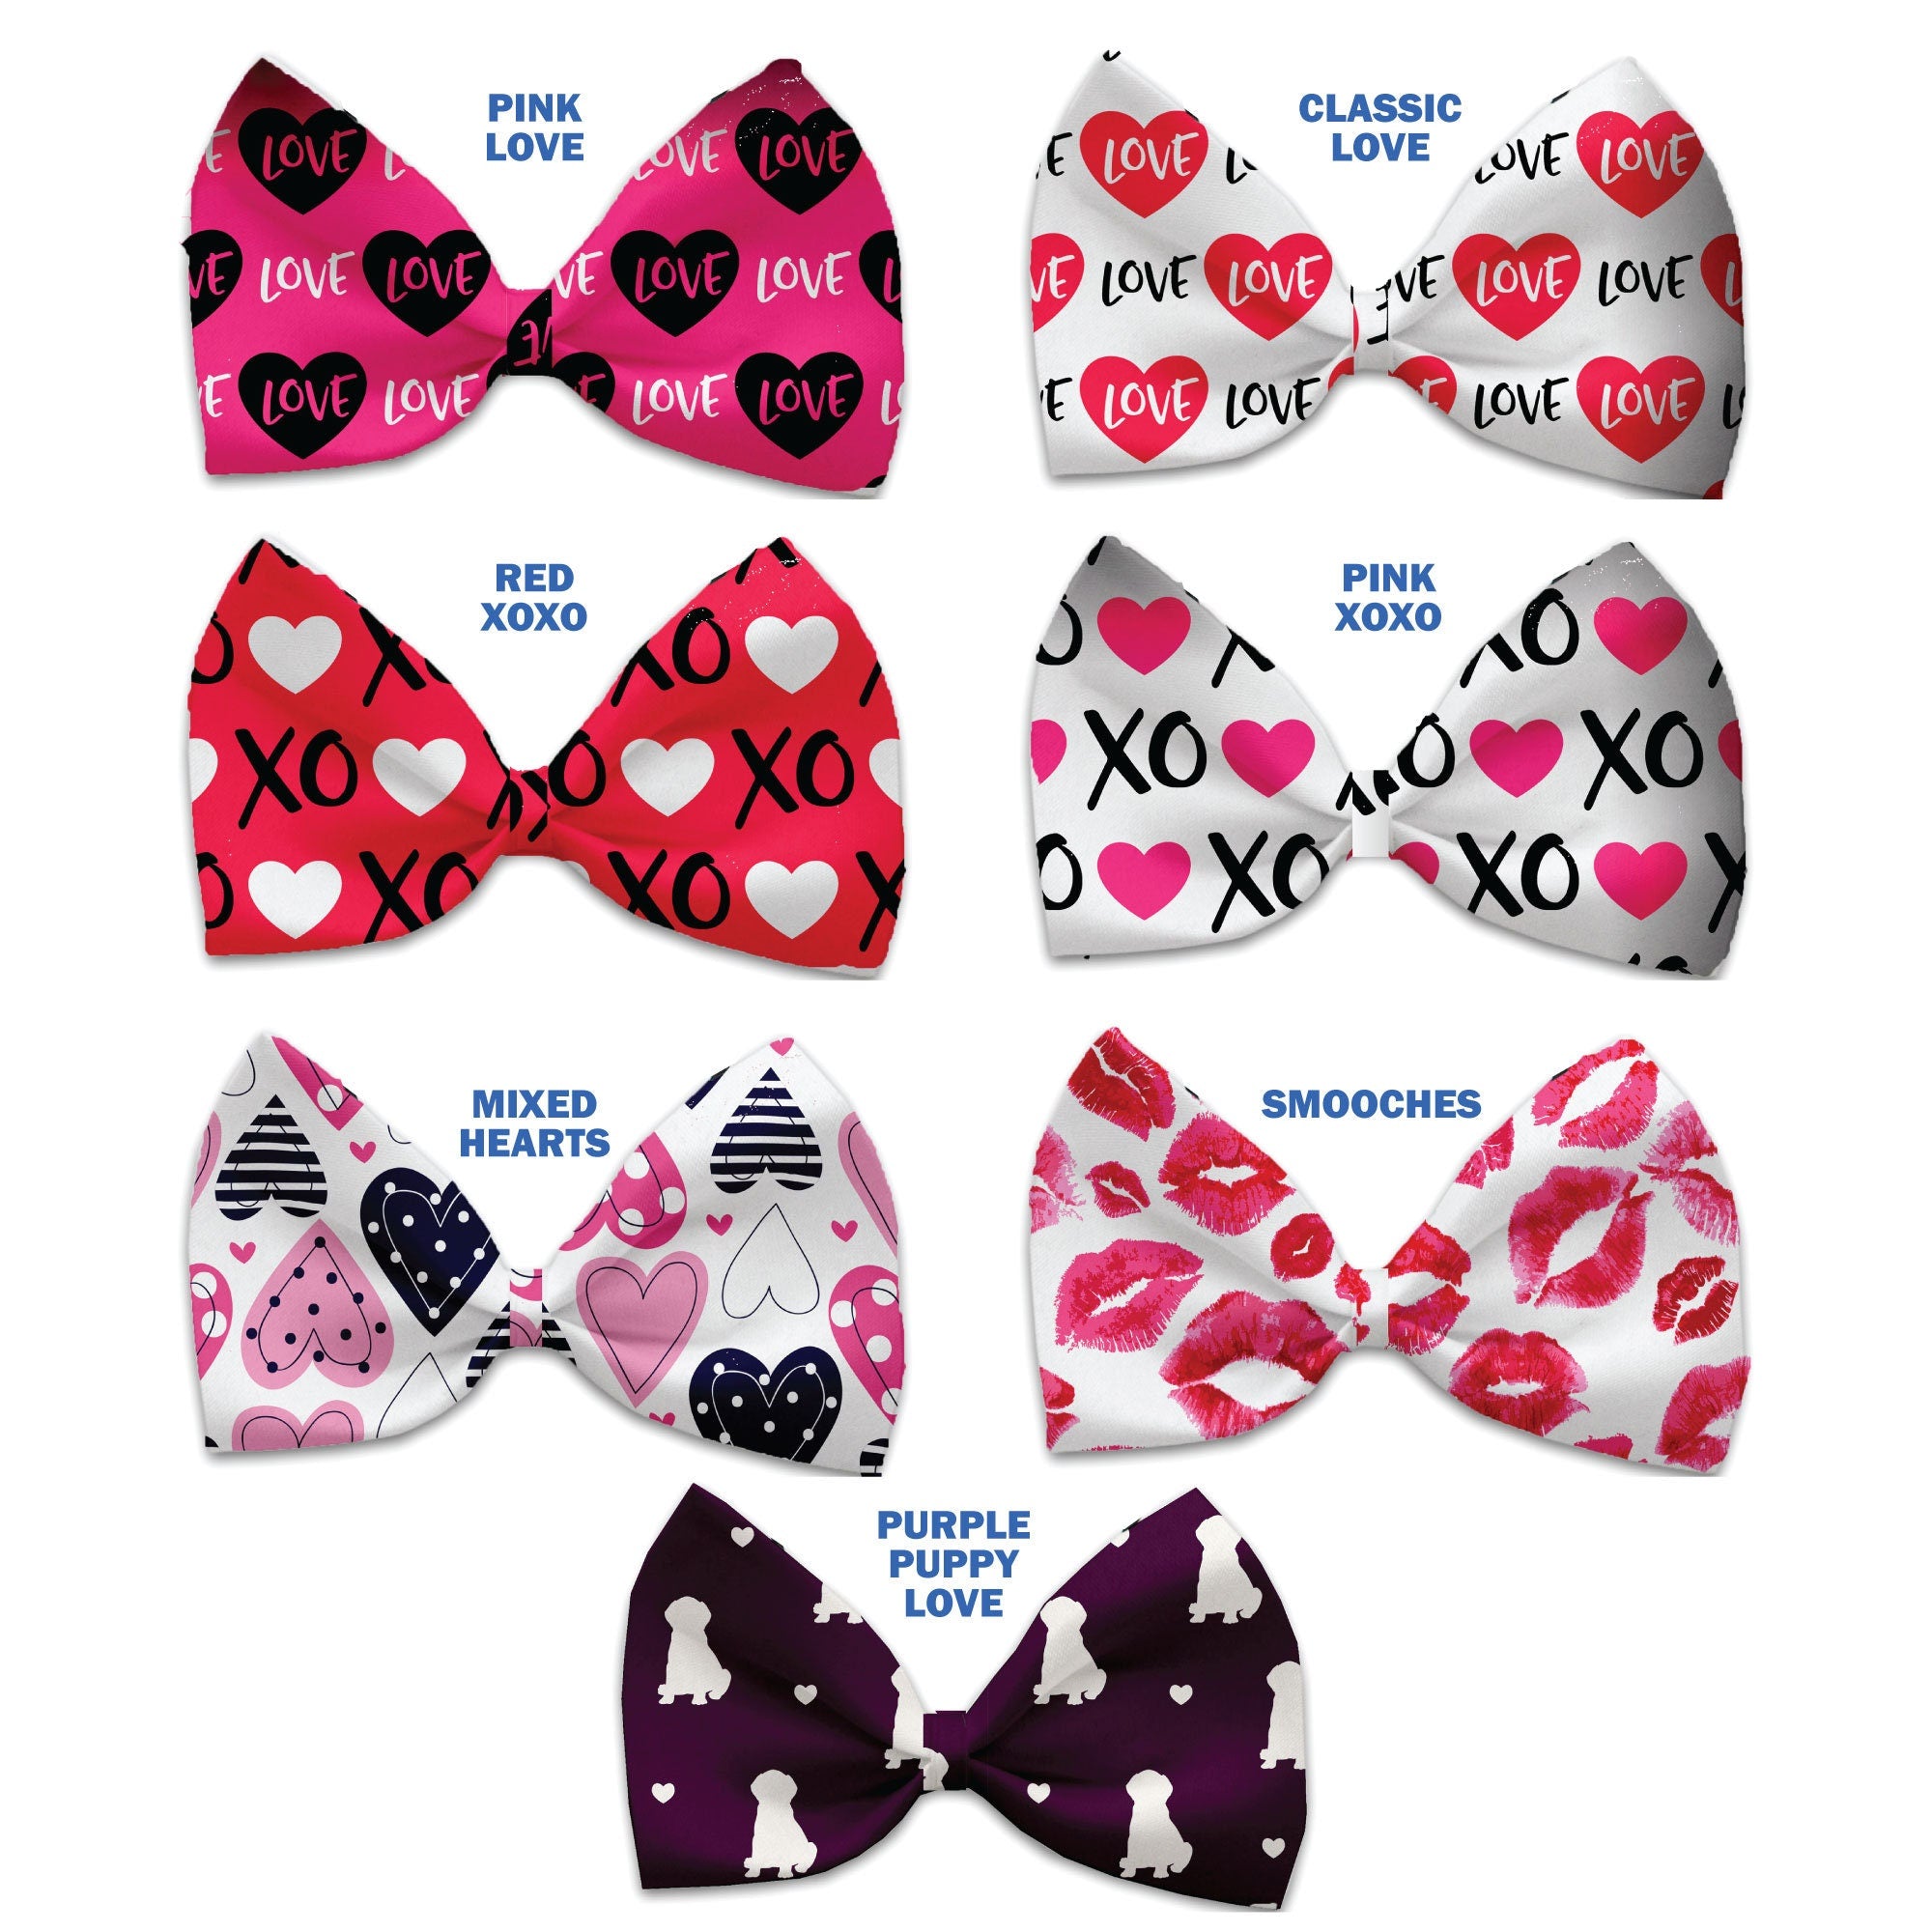 Pet, Dog and Cat Bow Ties, "Sweetheart Group" *Available in 7 different pattern options!*